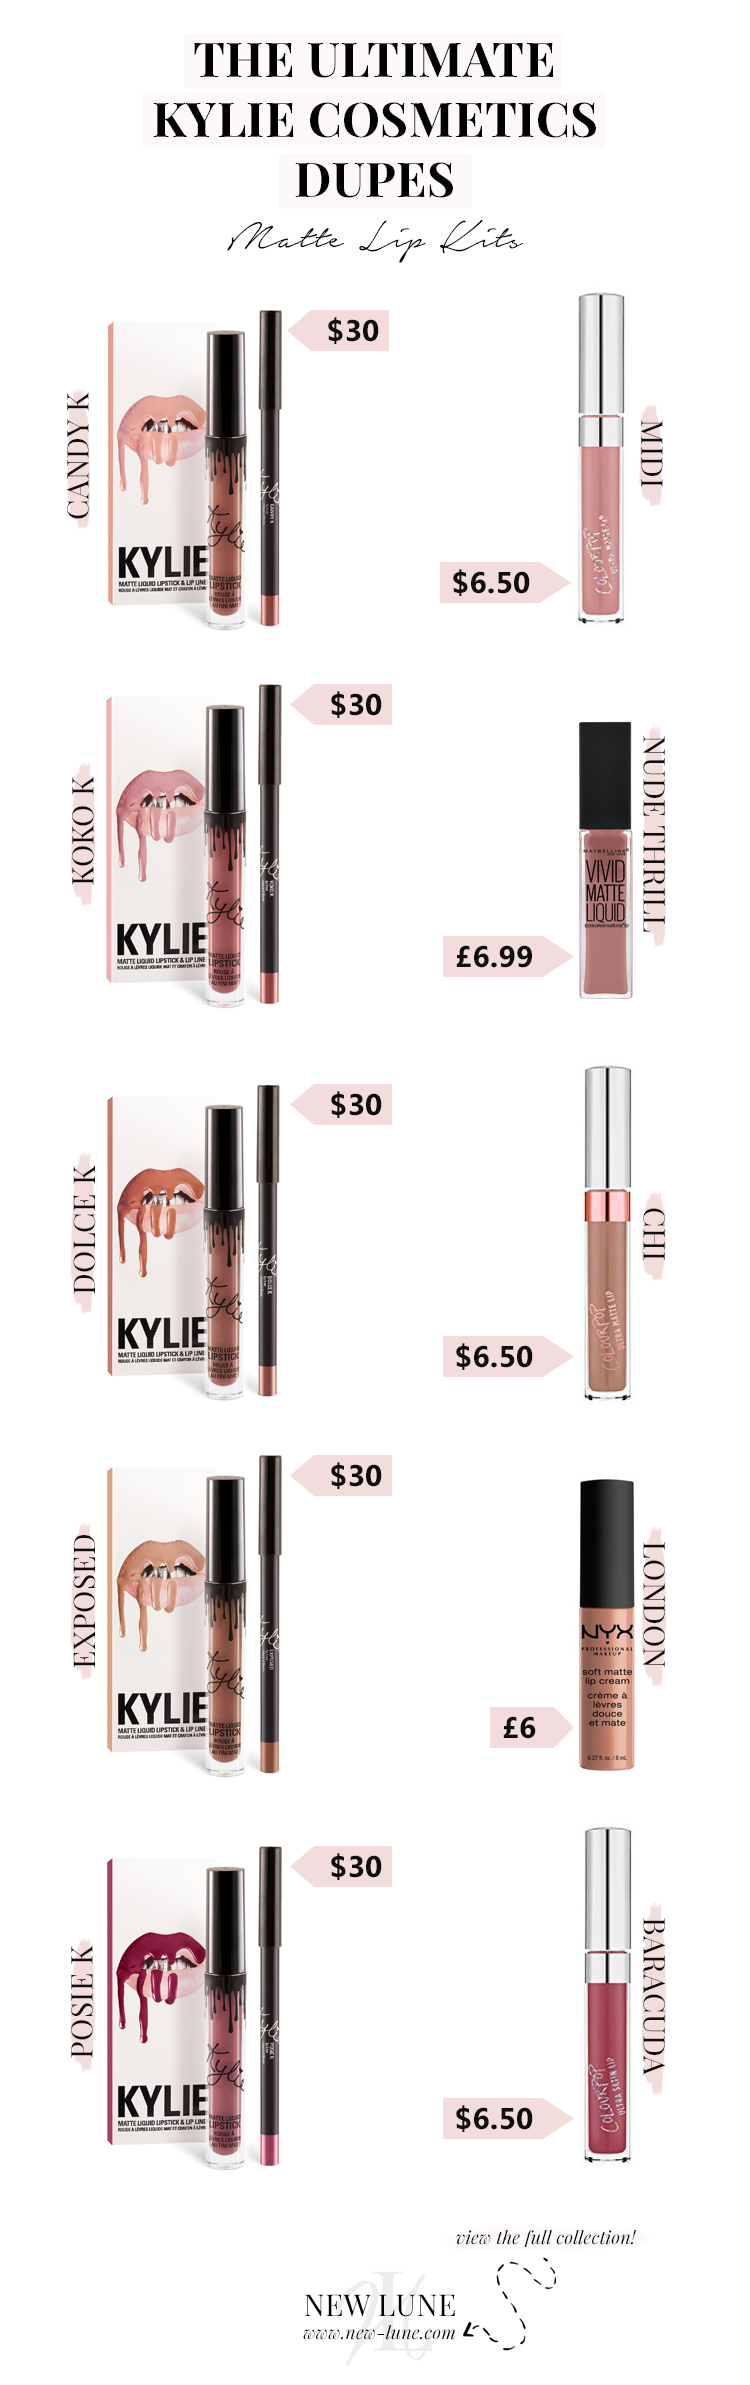 the ultimate kylie cosmetics dupes - matte lip kits - drugstore dupes - new lune 4